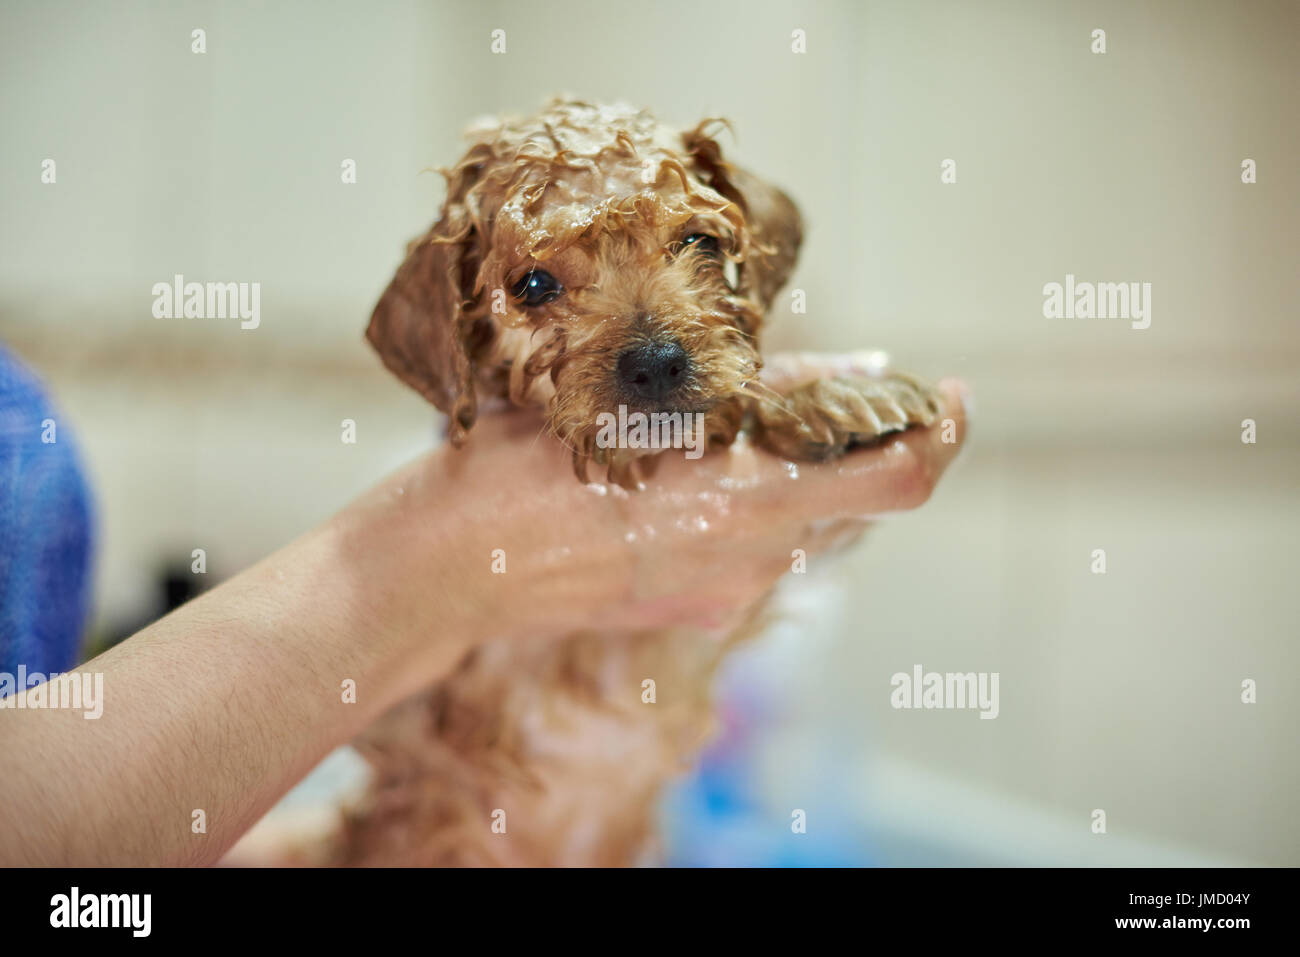 Washing small cute puppy. Woman hands cleaning poodle puppy Stock Photo